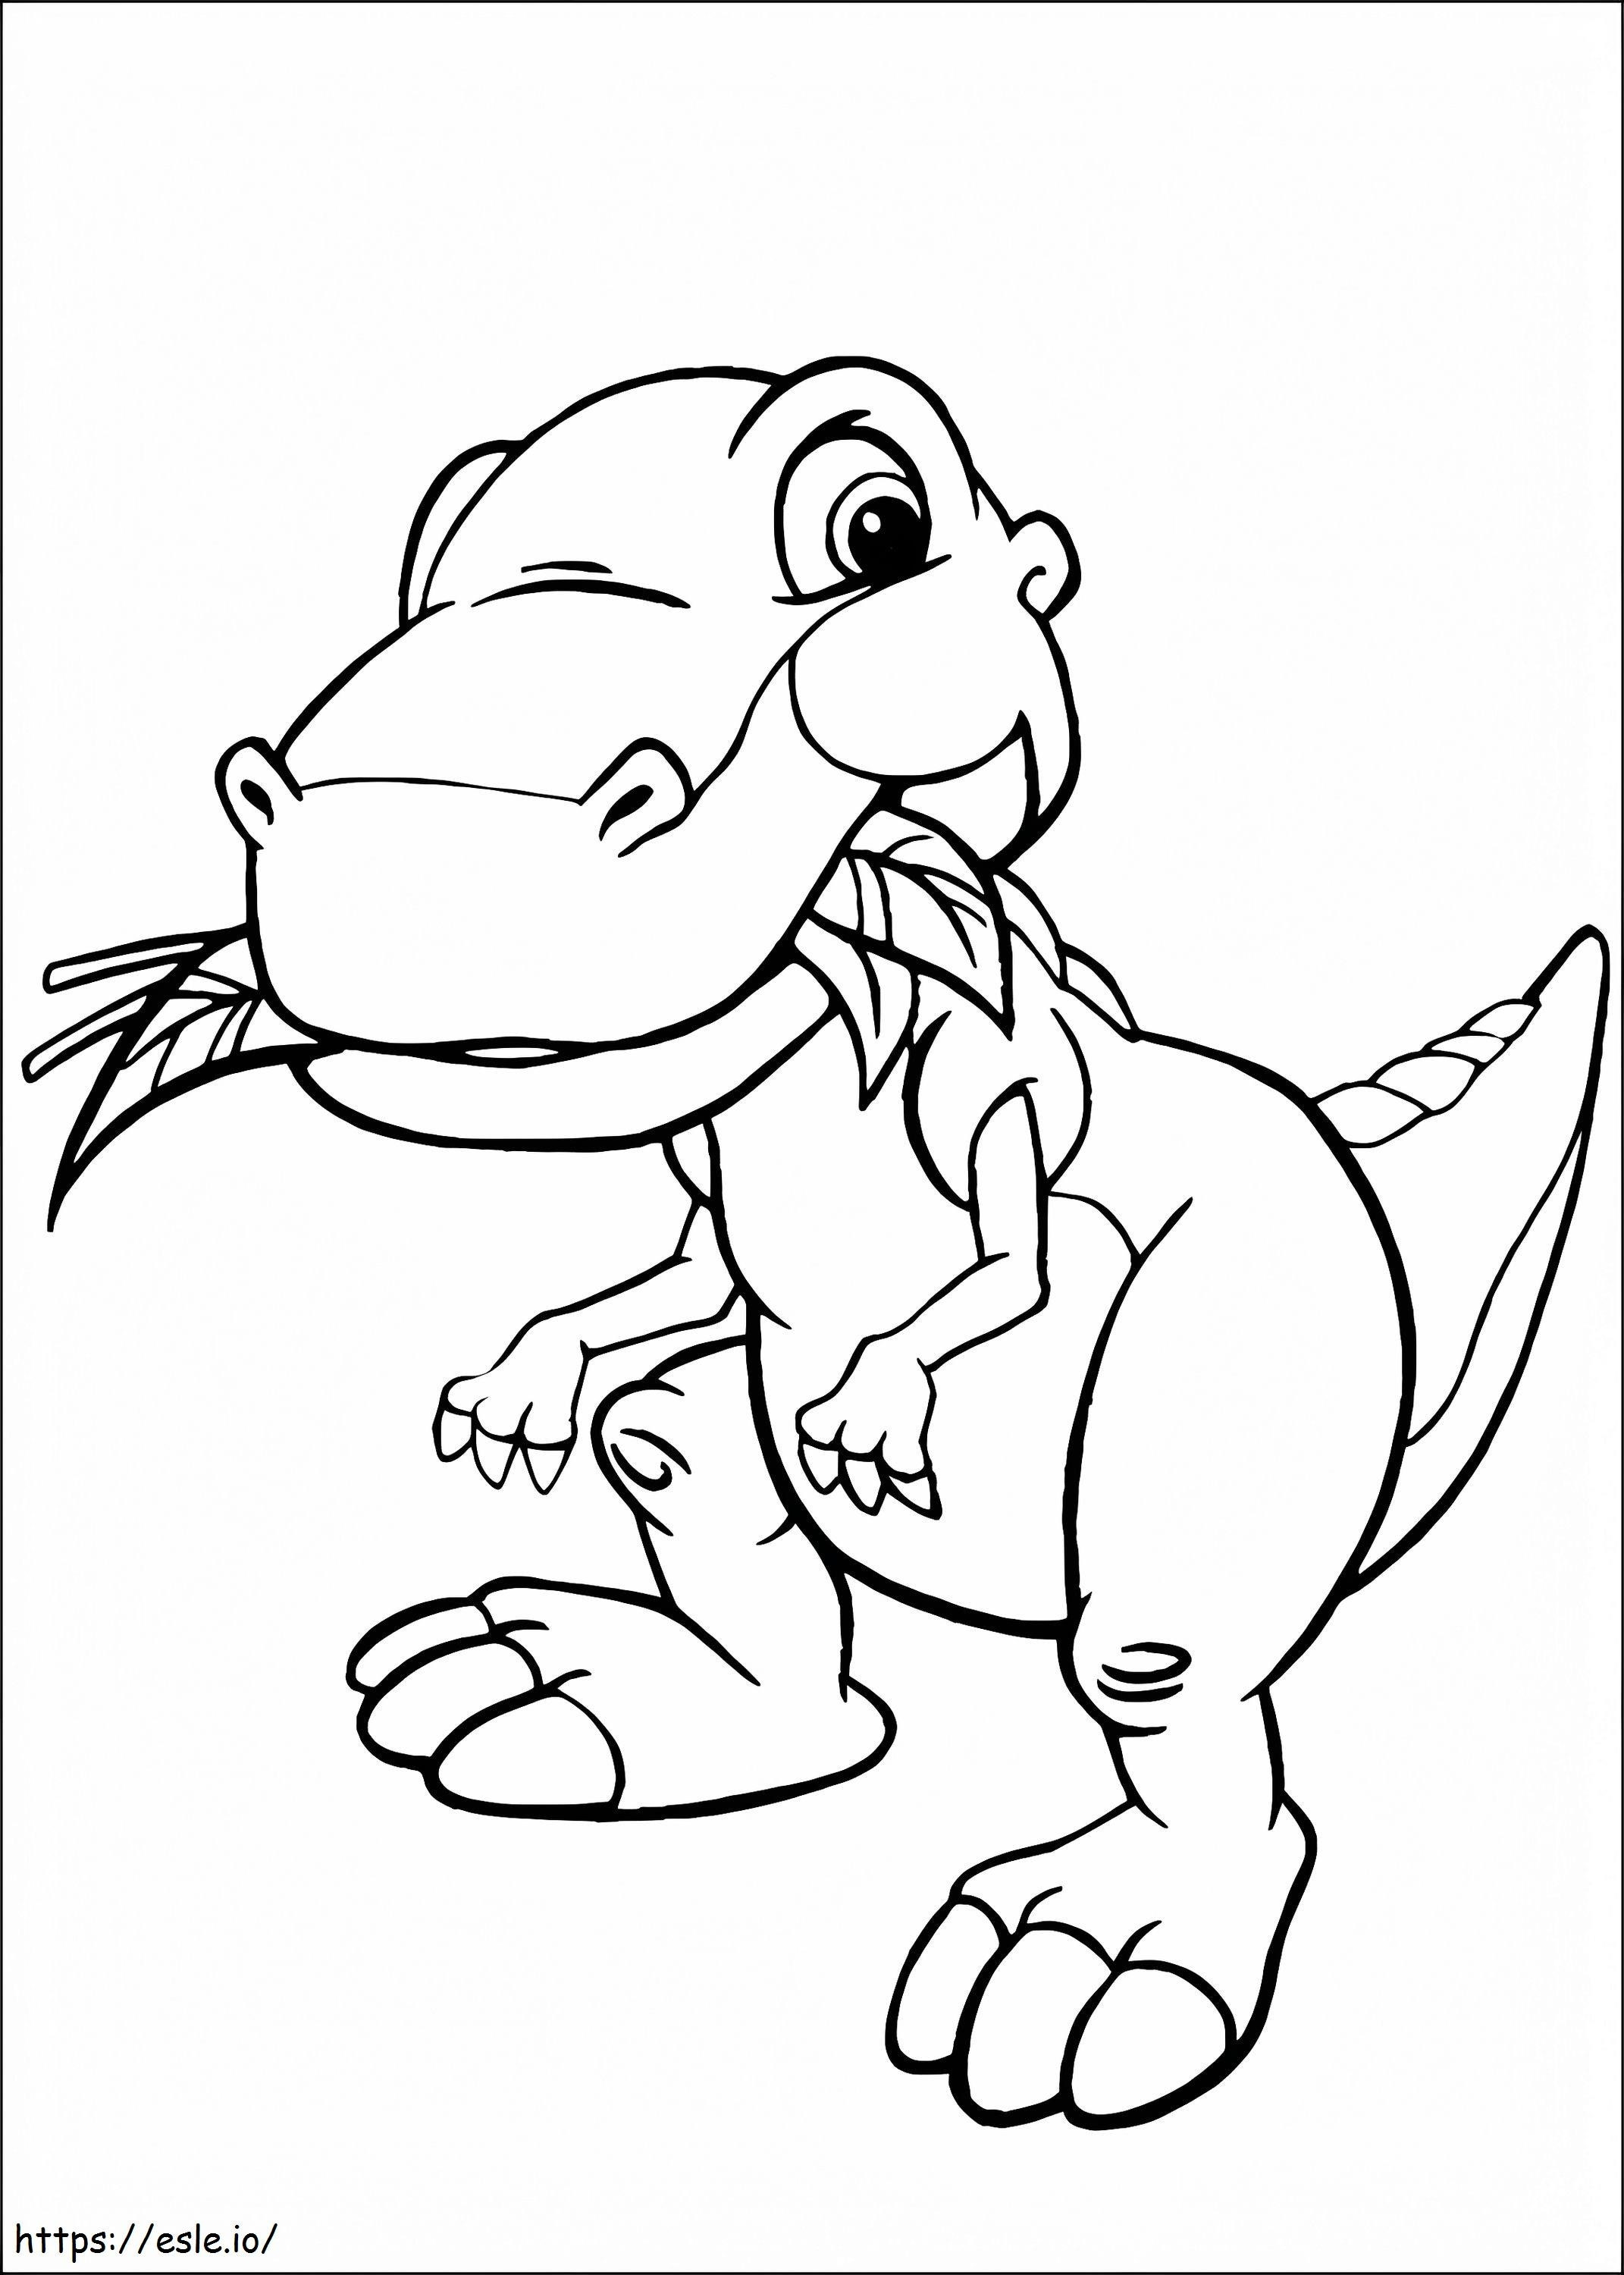 Chomper From The Land Before Time coloring page